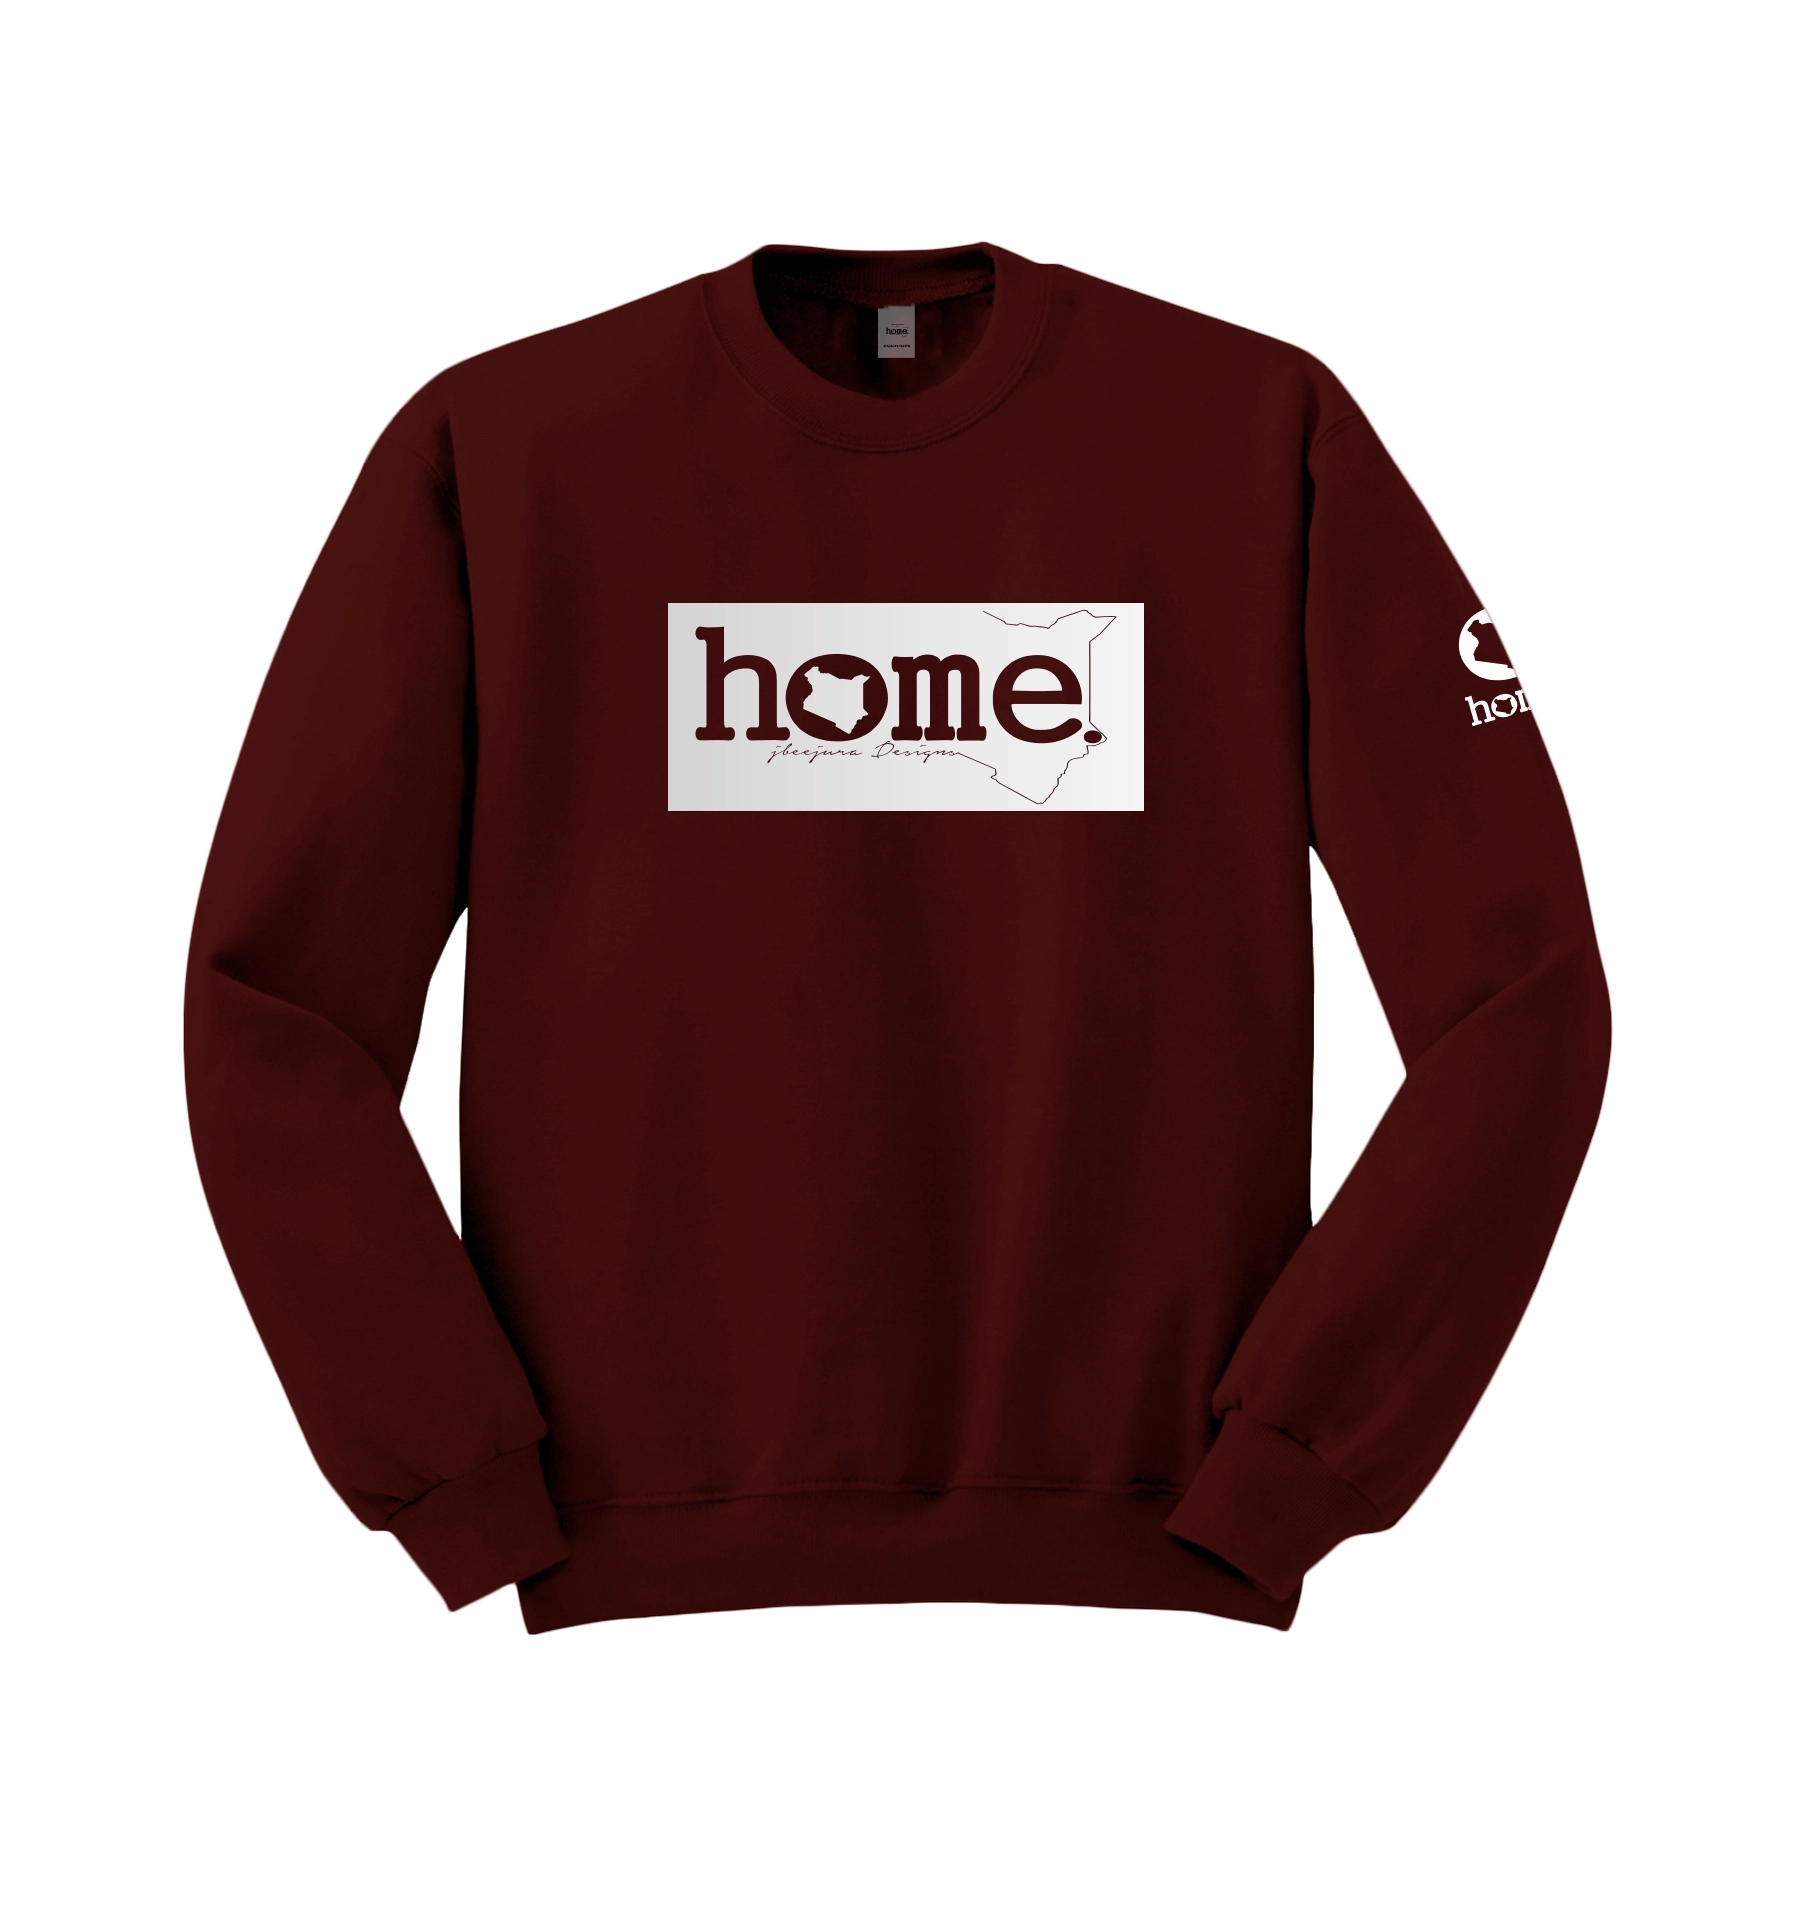 home_254 MAROON SWEATSHIRT (MID-HEAVY FABRIC) WITH A SILVER CPRINT